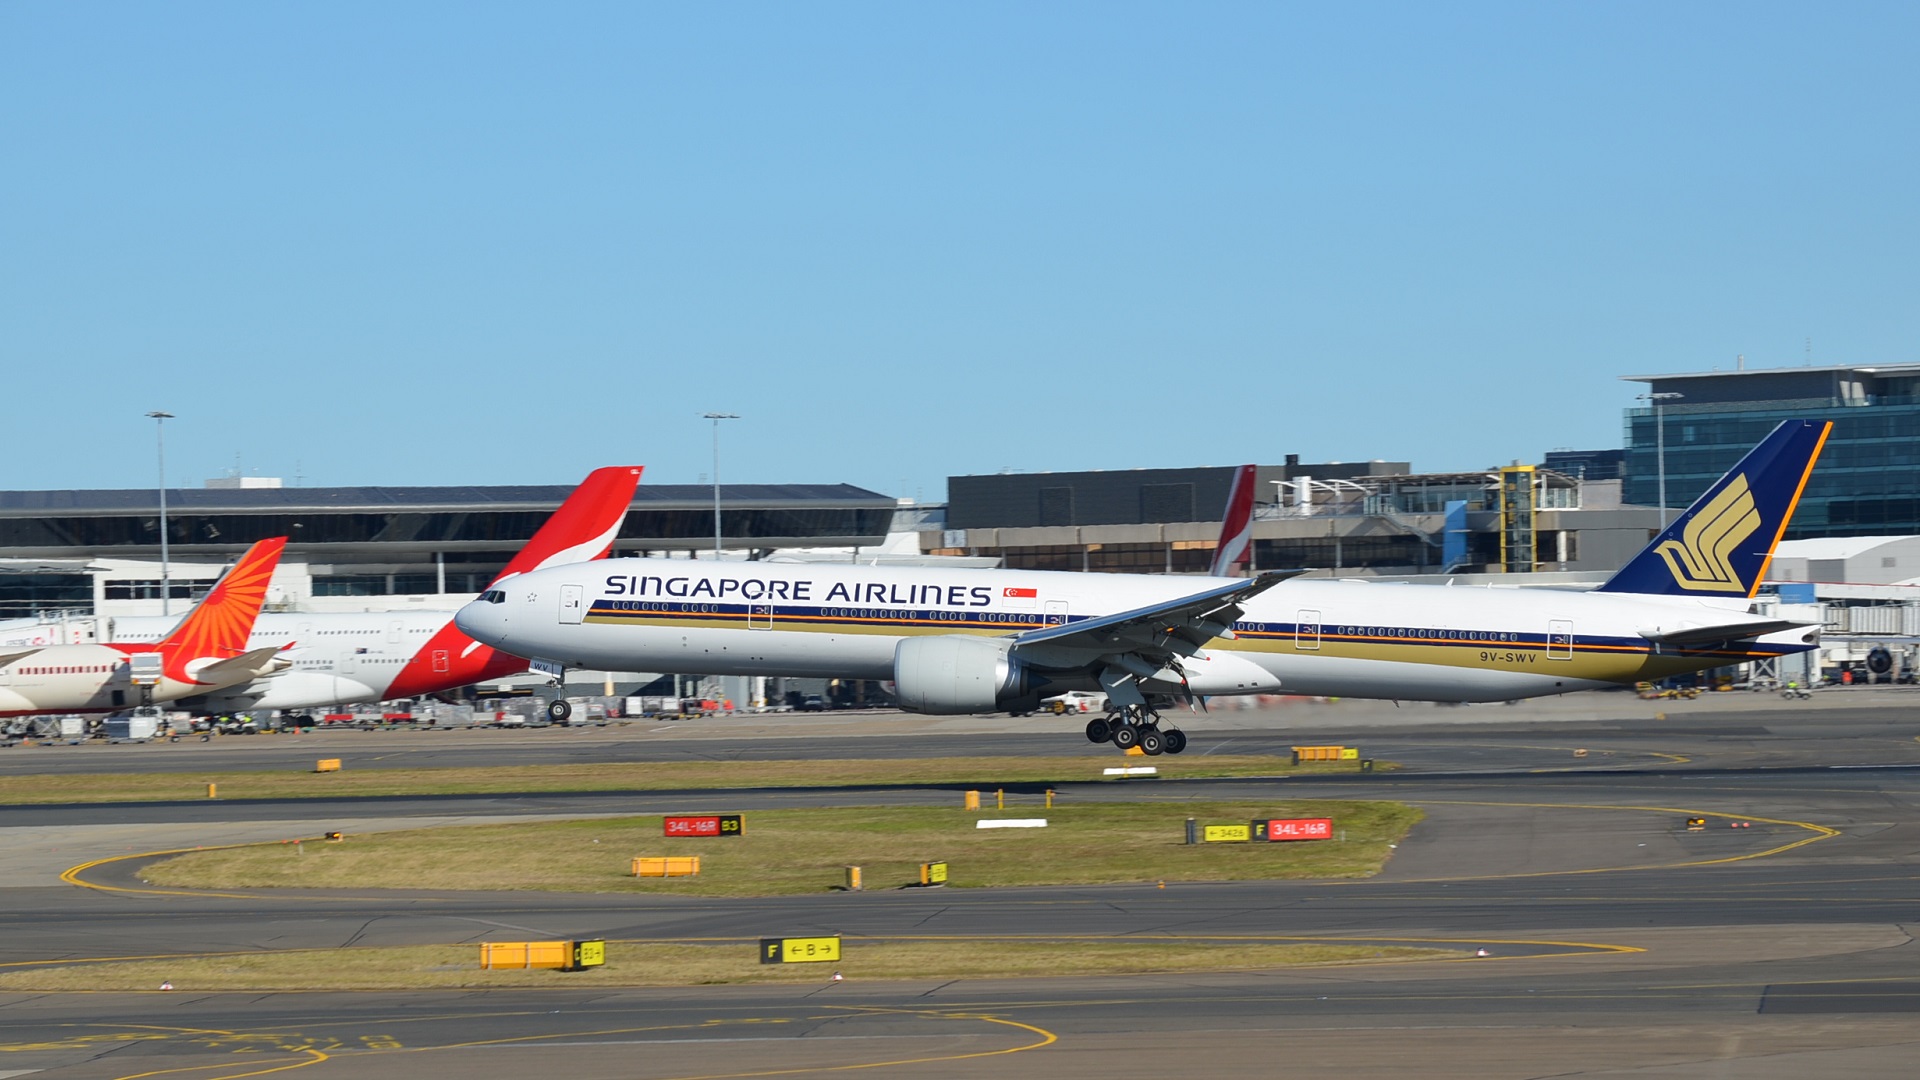 boeing 777, vehicles, aircraft, airplane, airport, boeing, photography, sydney